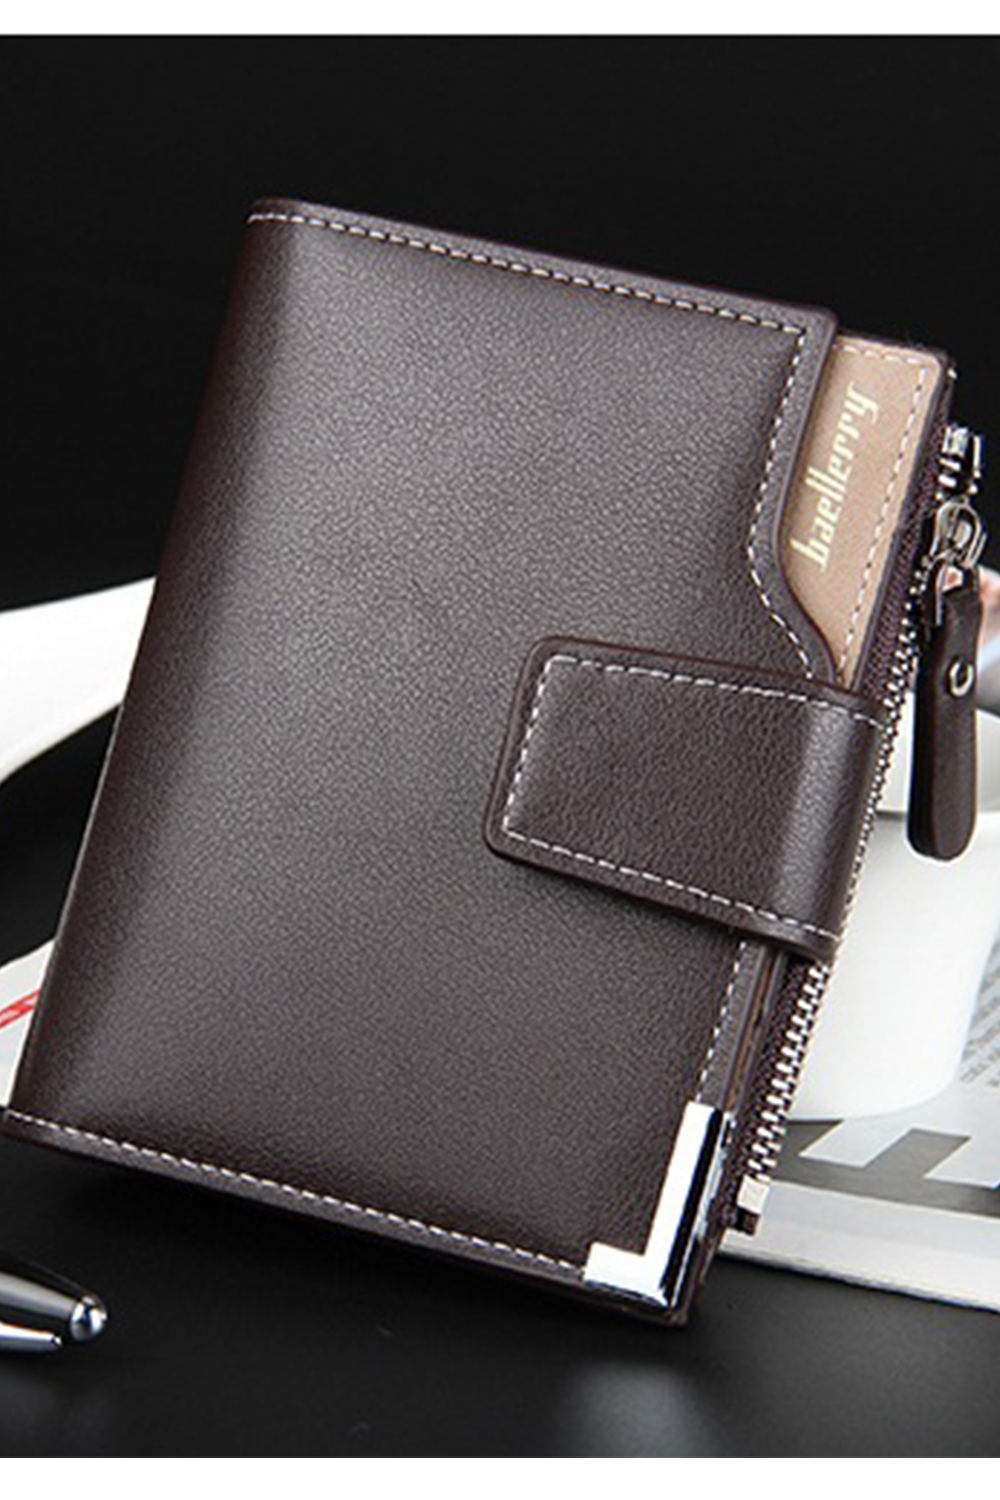 Unomatch Men Zipper Opening Mock Wallet Brown and similar items